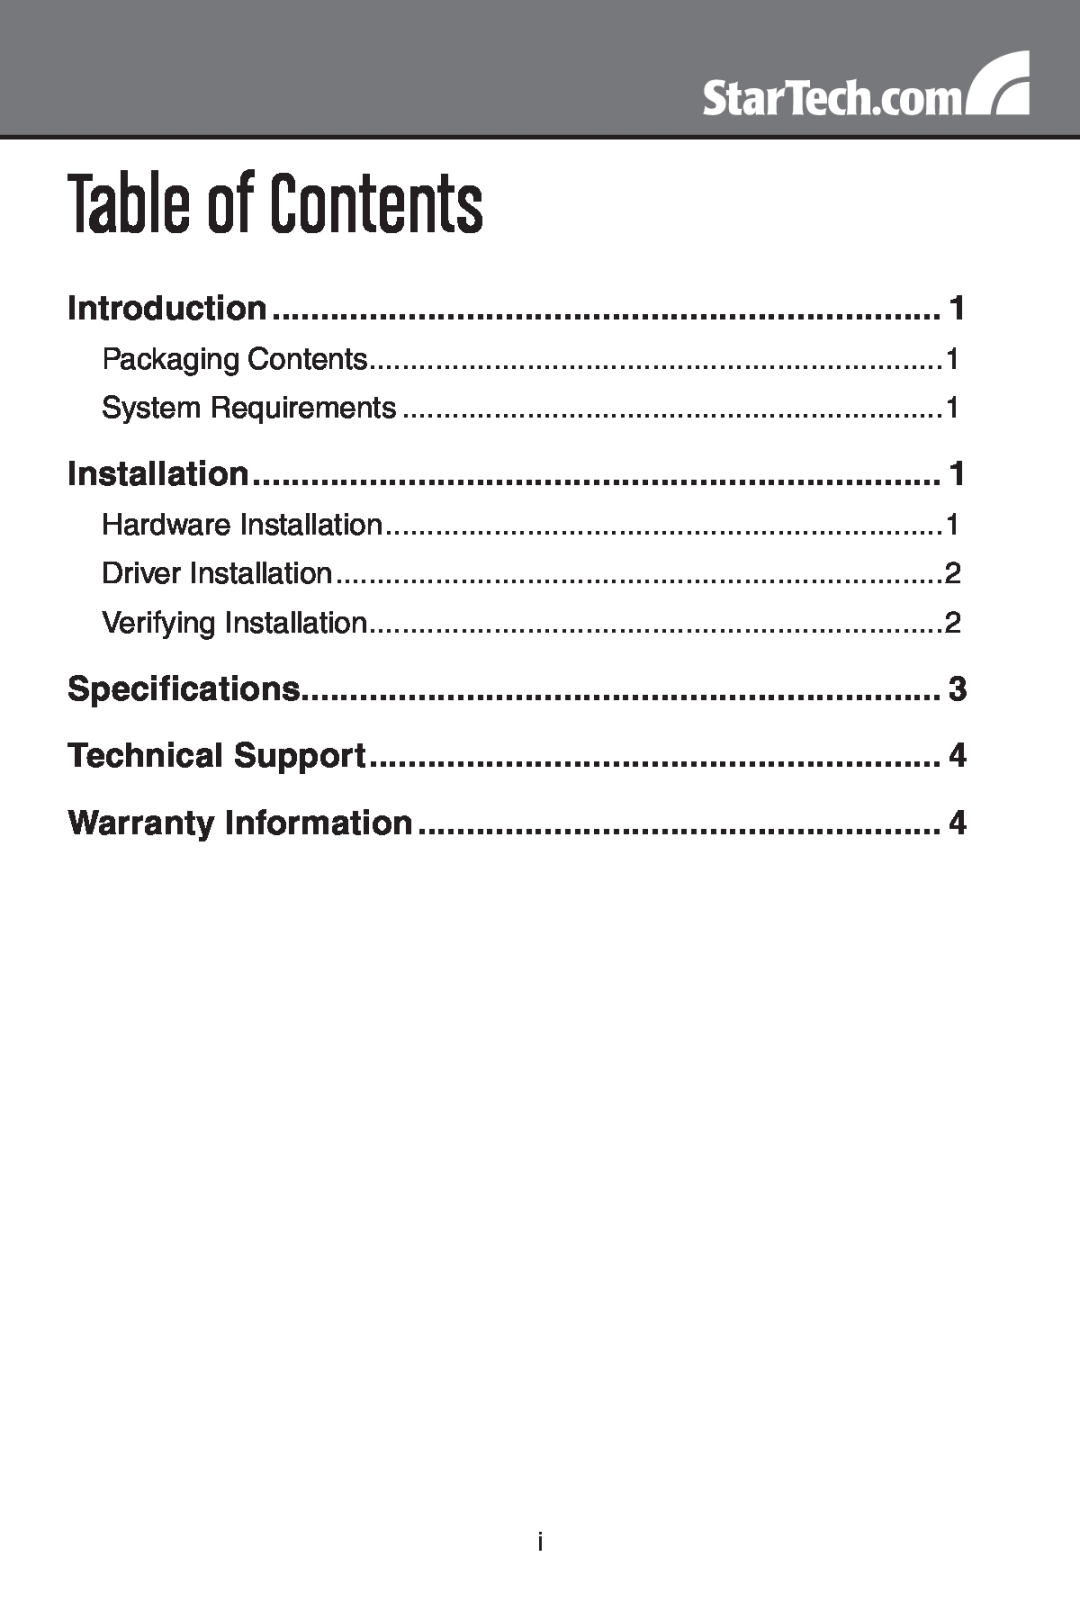 StarTech.com PEX4S952 instruction manual Table of Contents, Introduction, Installation, Specifications, Technical Support 